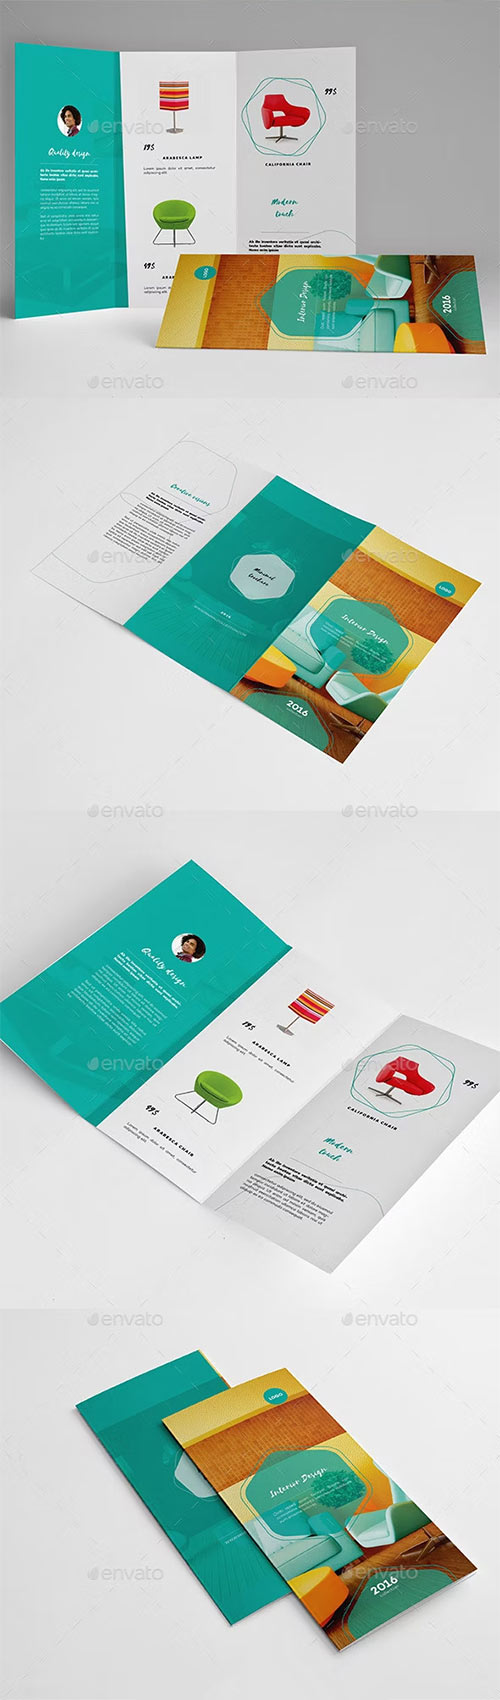 A4 & Letter Minimal Product Brochure 16399266